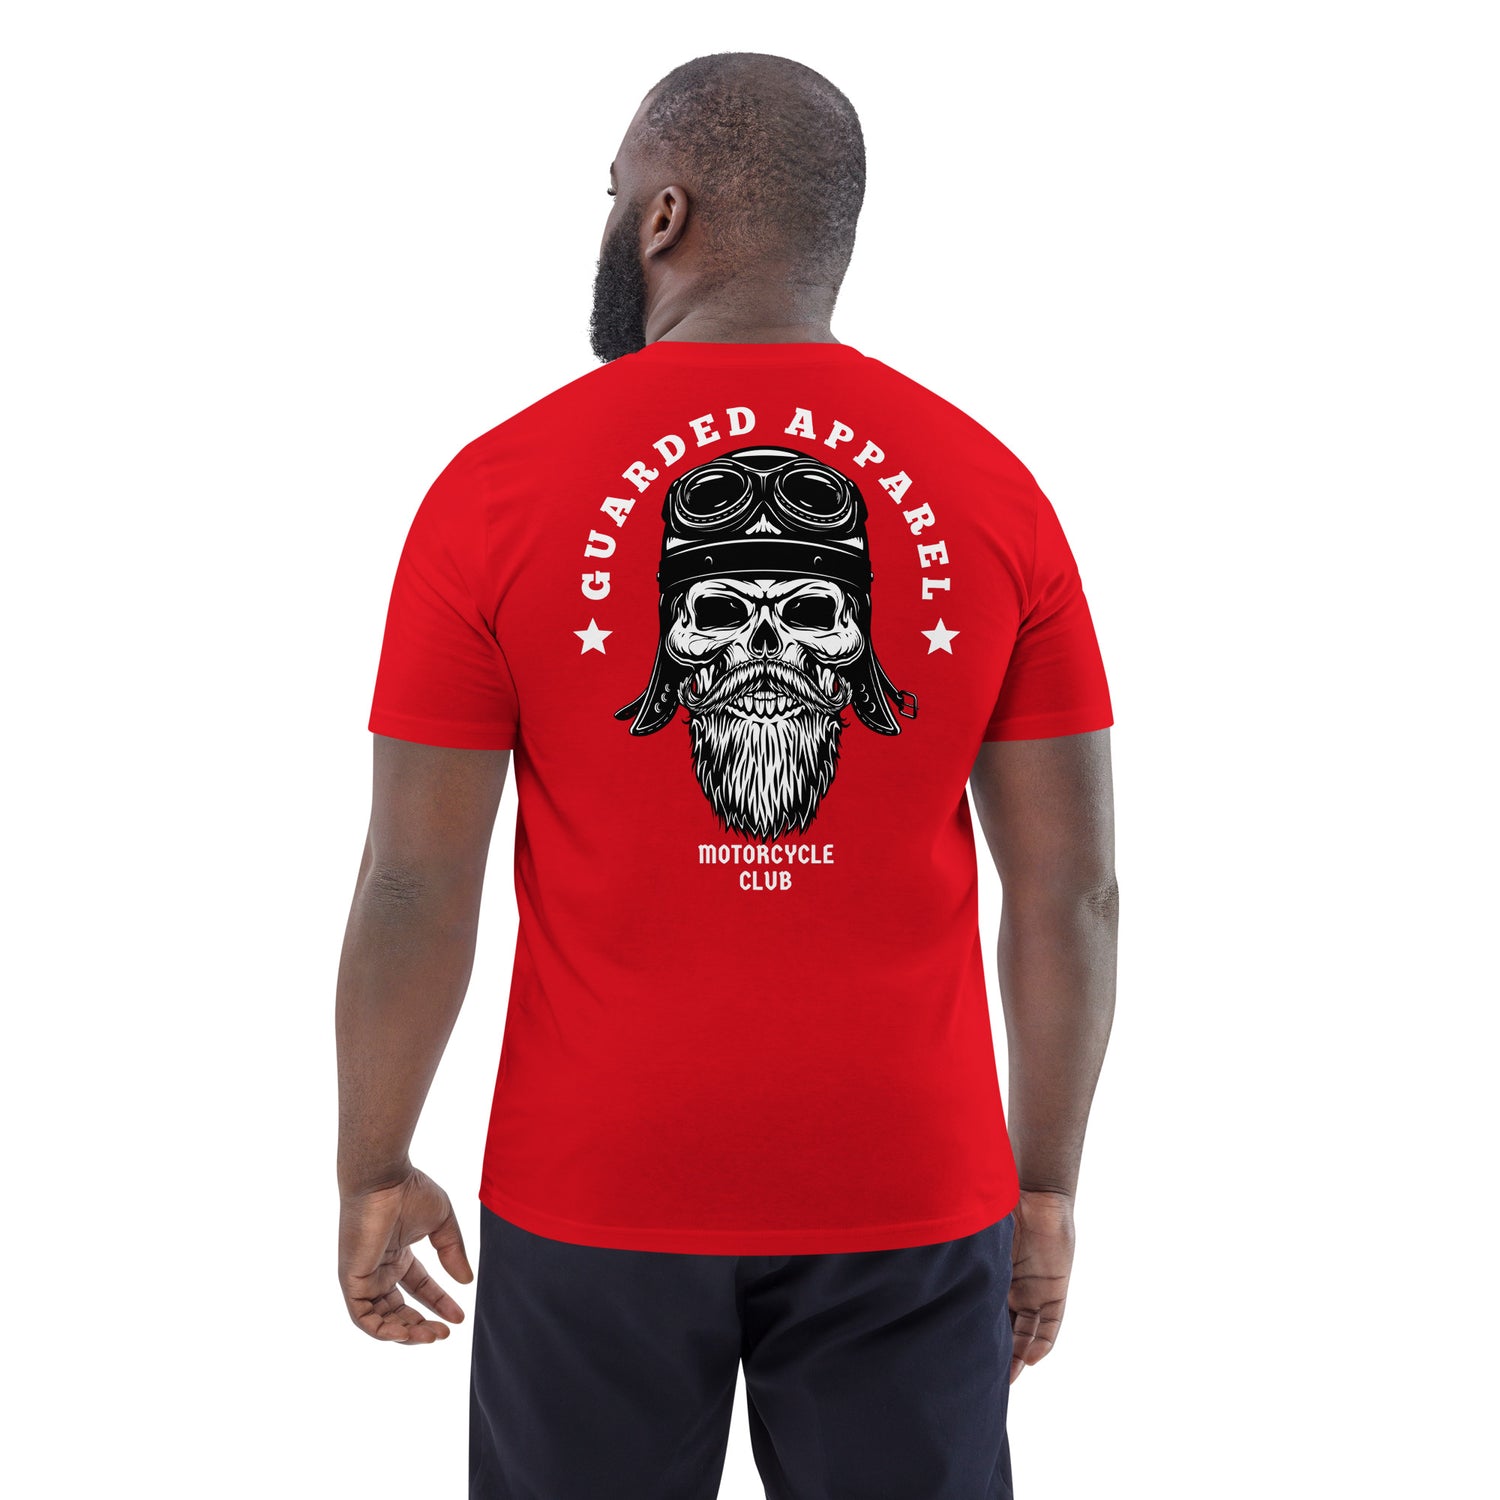 Guarded Motorcycle Club Dark t-shirt